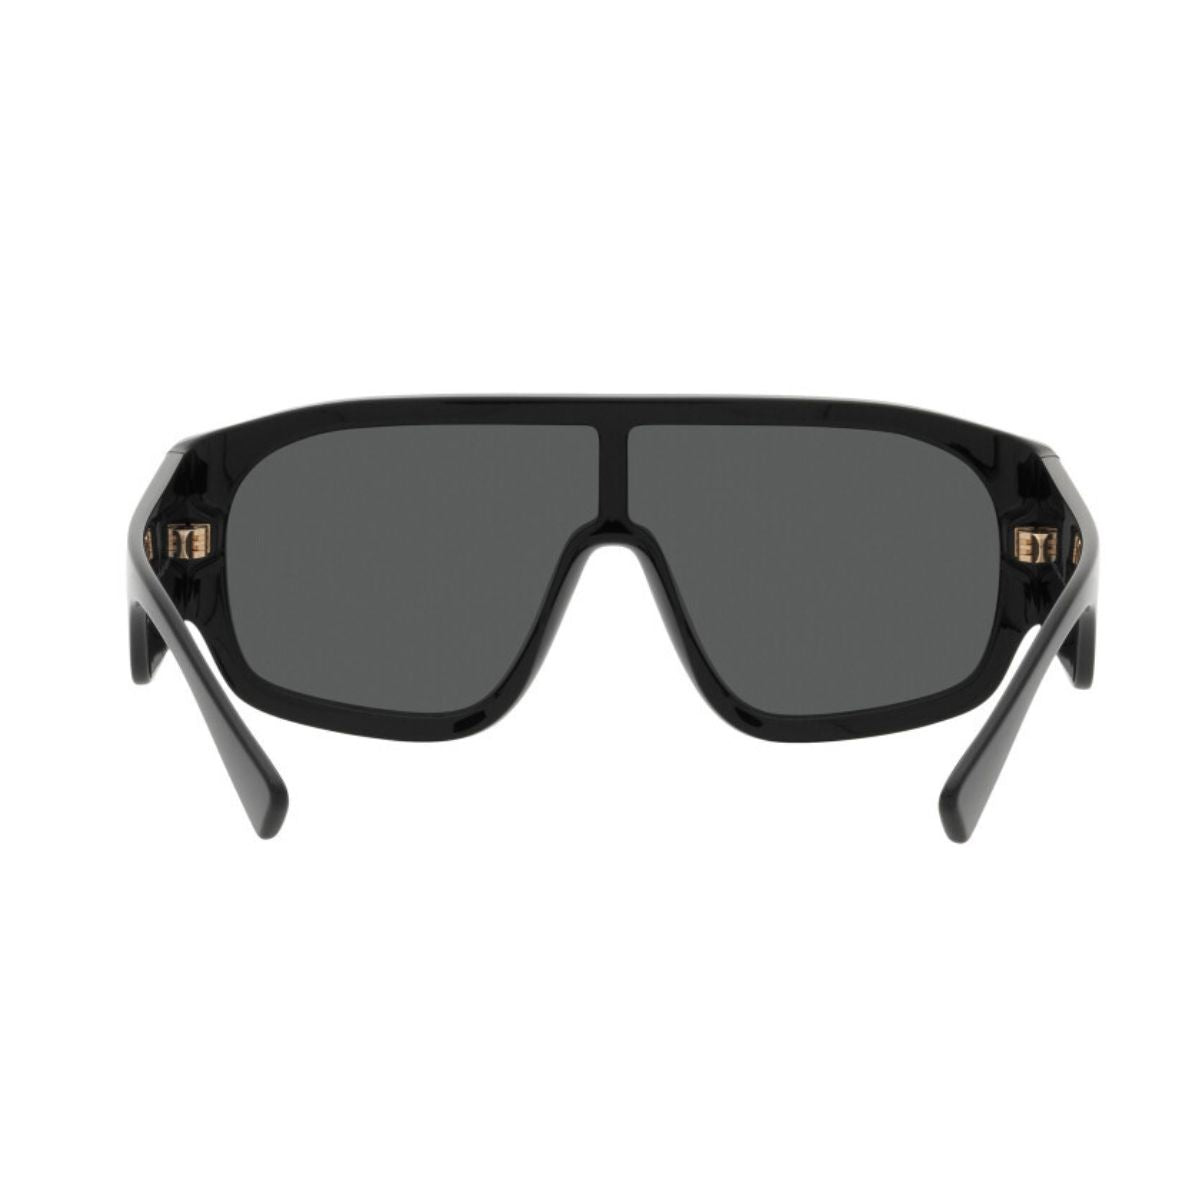 " BuyVersace 4439 GB1/87 UV Protection Sunglasses For Unisex At Optorium"